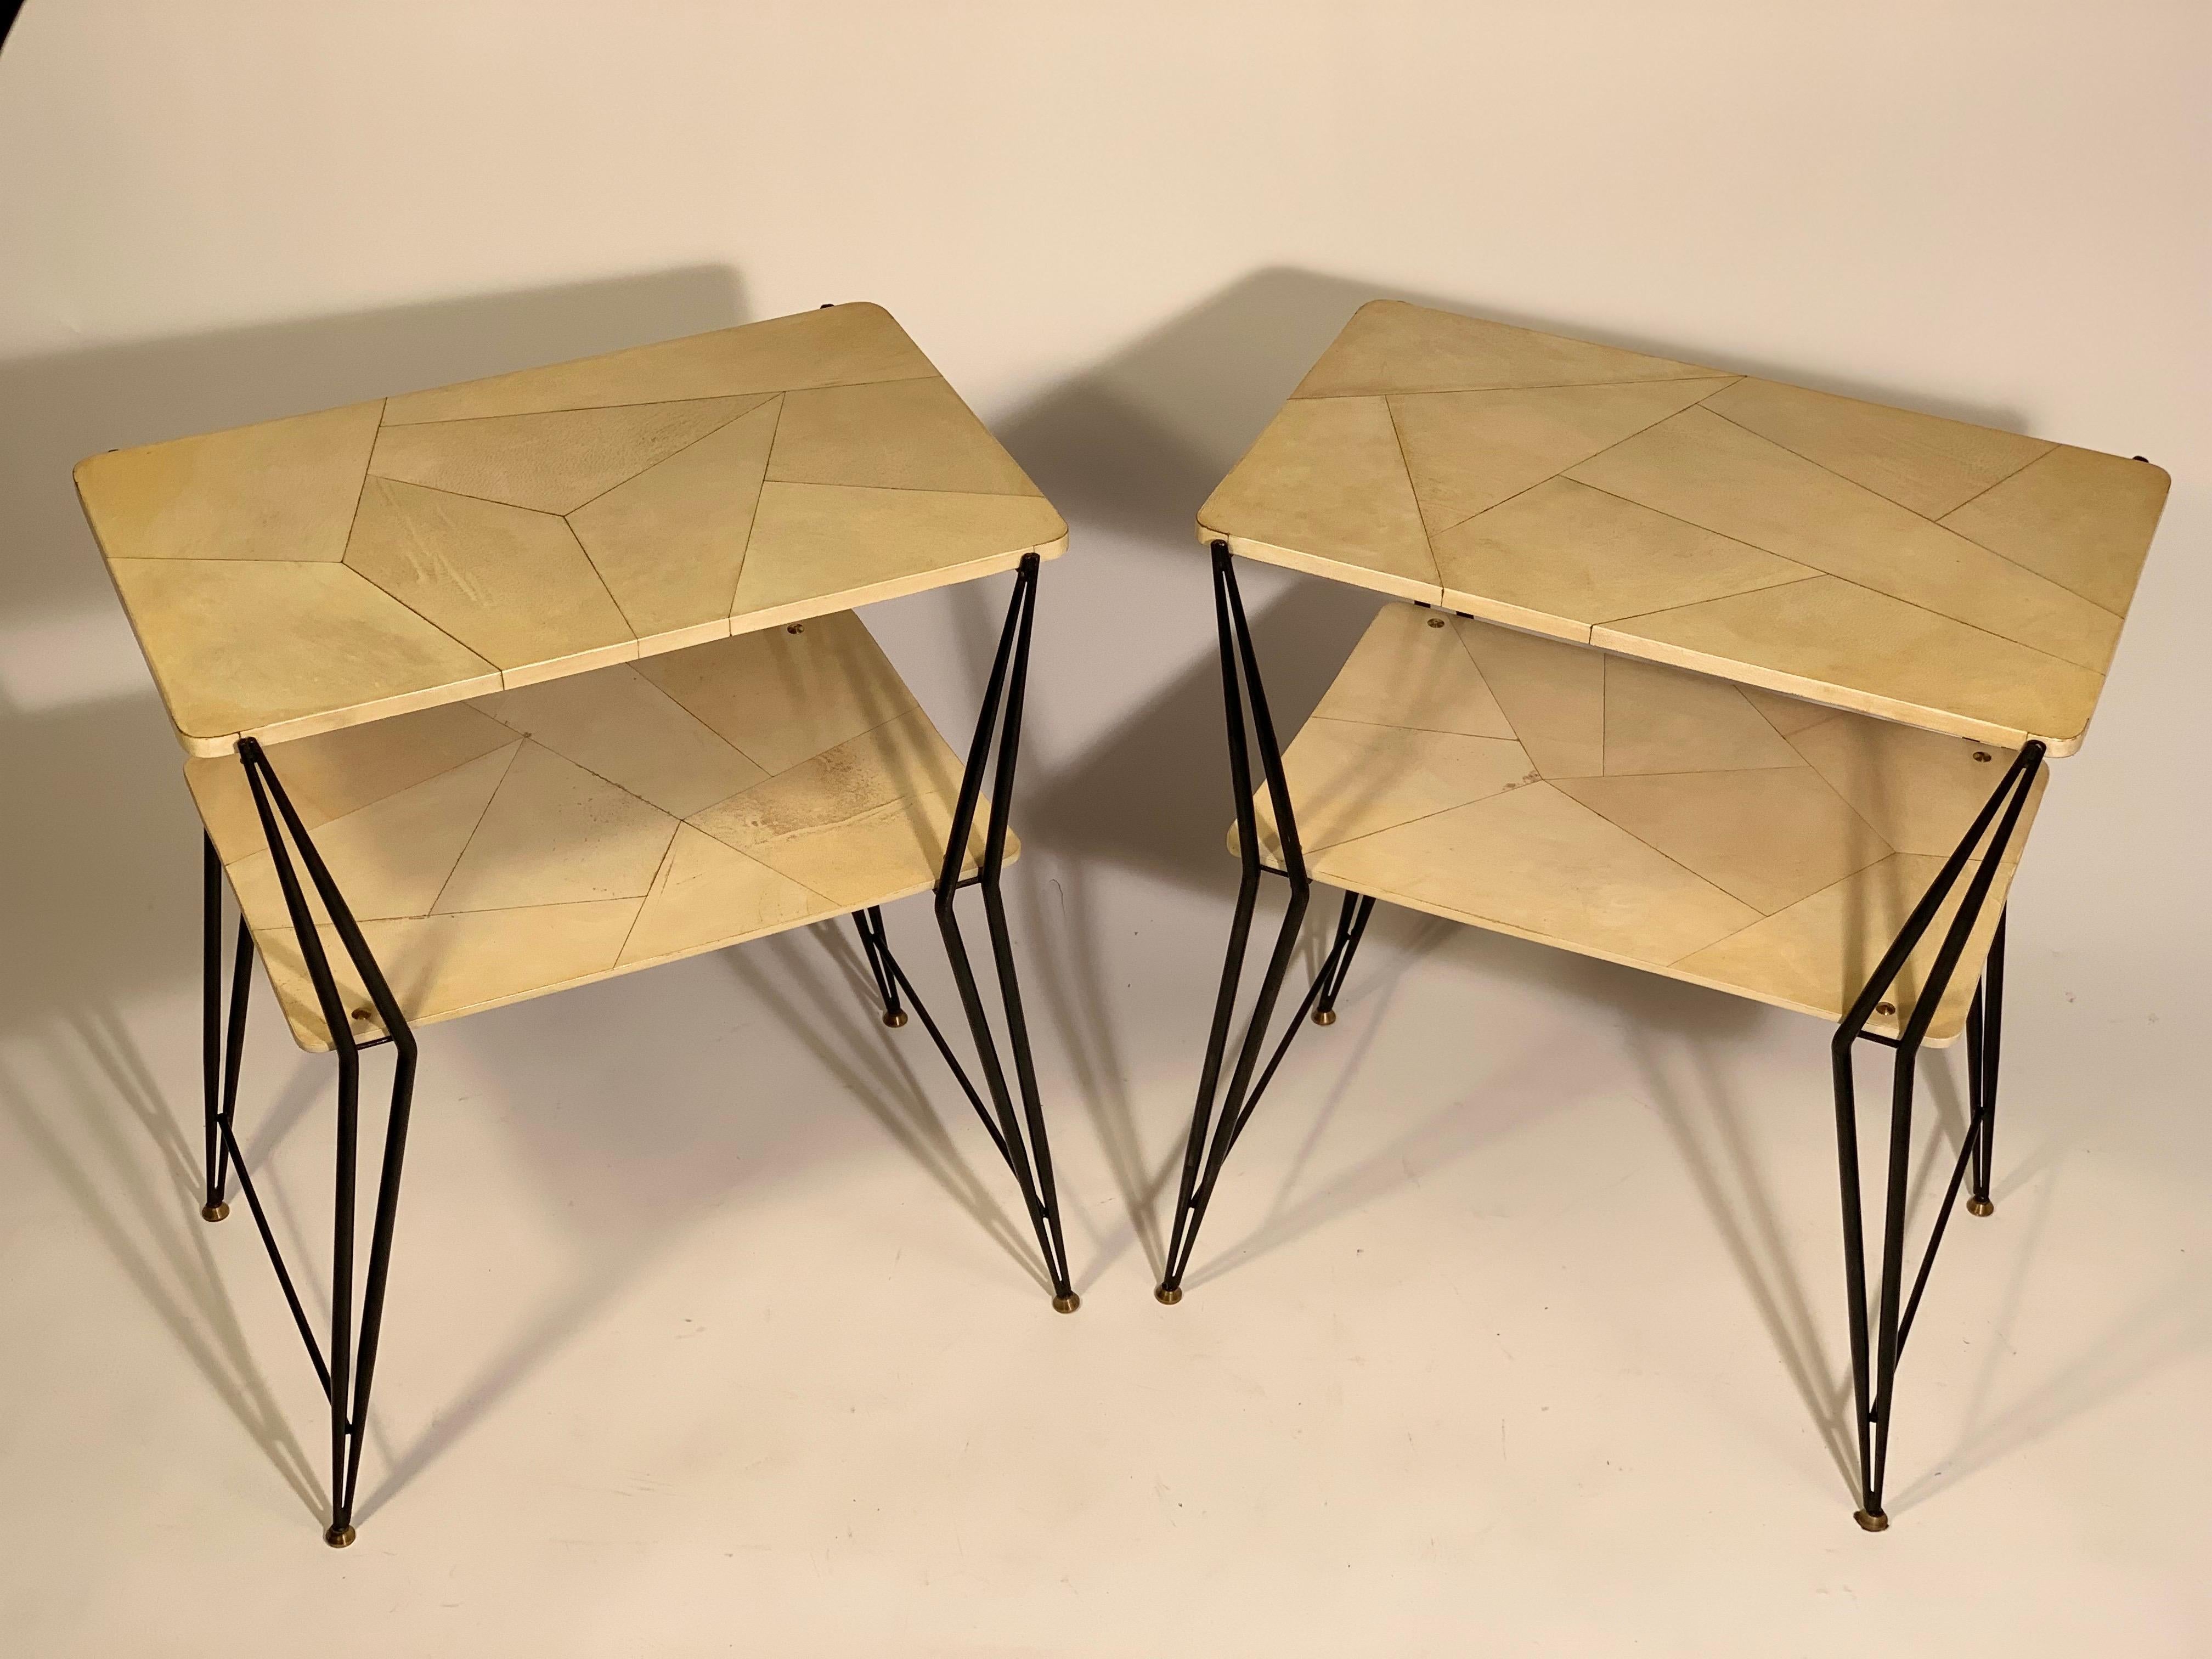 Pair of rectangular Italian coffee tables or side tables with double top, structure in thin black lacquered metal tubular with brass details, feet and buttons.
The two tops are covered in parchment inlaid with geometric segments that form an